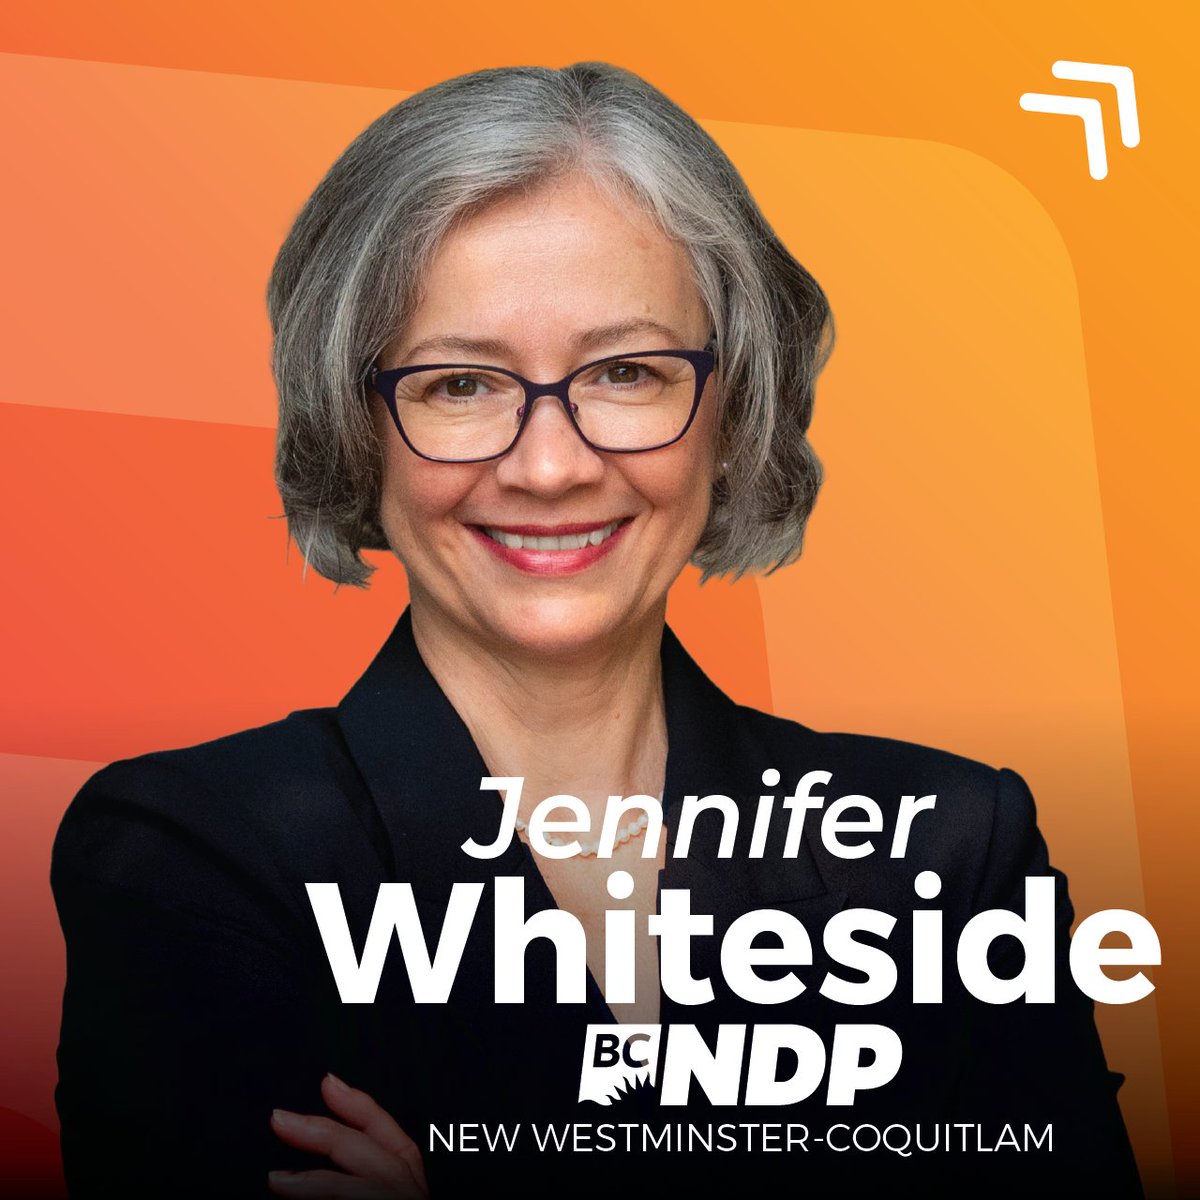 We're thrilled to announce Jennifer Whiteside as our BC NDP candidate in New Westminster-Coquitlam. Born and raised in New West, Jennifer (@JM_Whiteside) is a former labour leader and the current Minister of Mental Health and Addictions. Please join us in welcoming her!